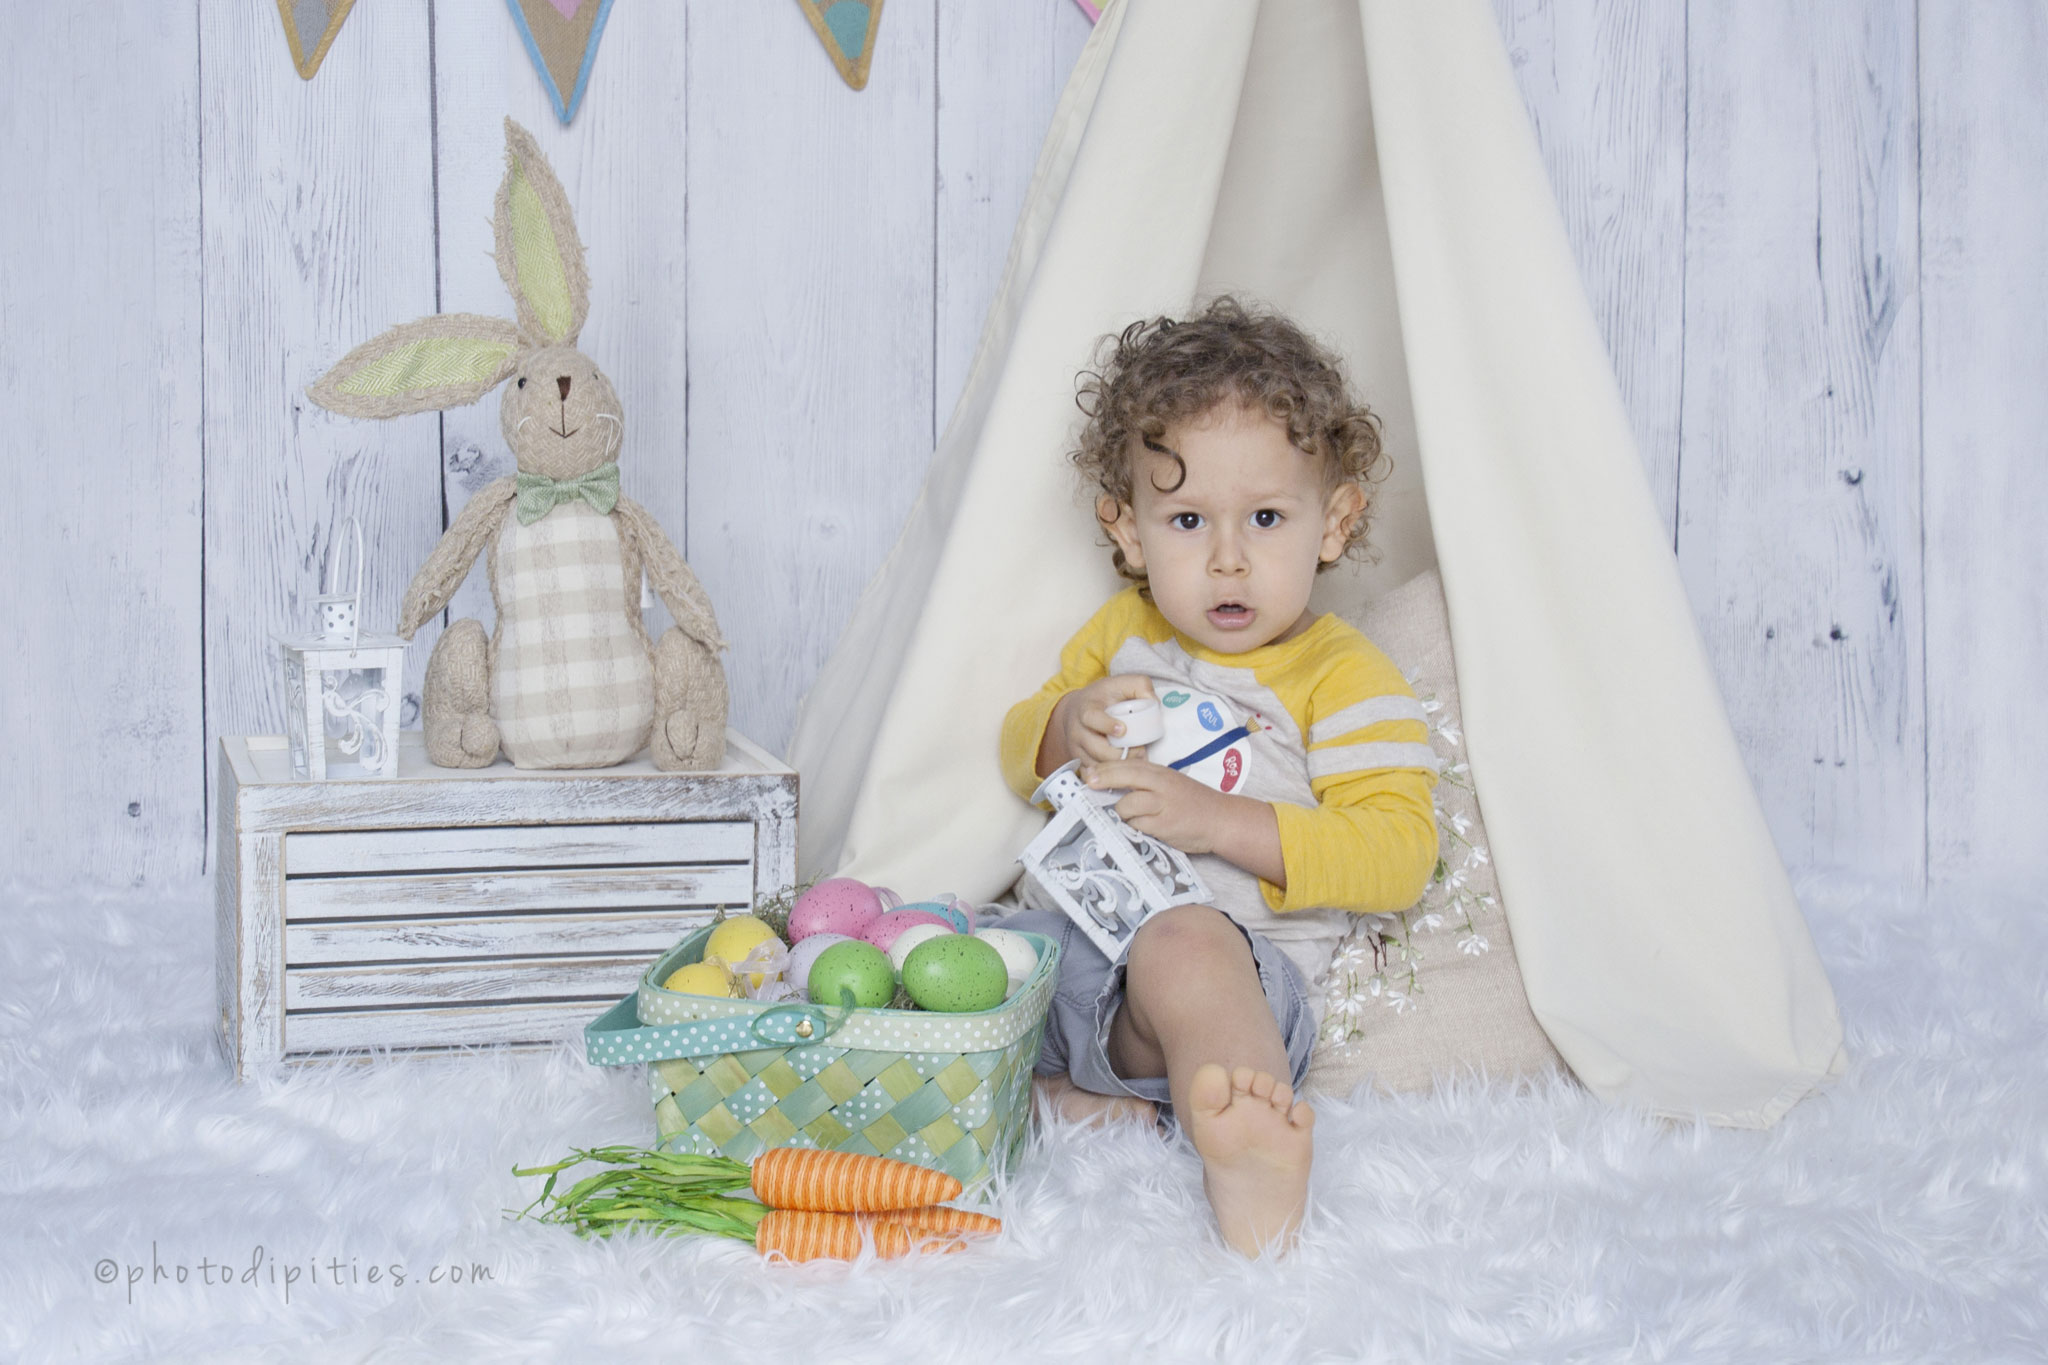 Photodipities Family | Children Easter Photography